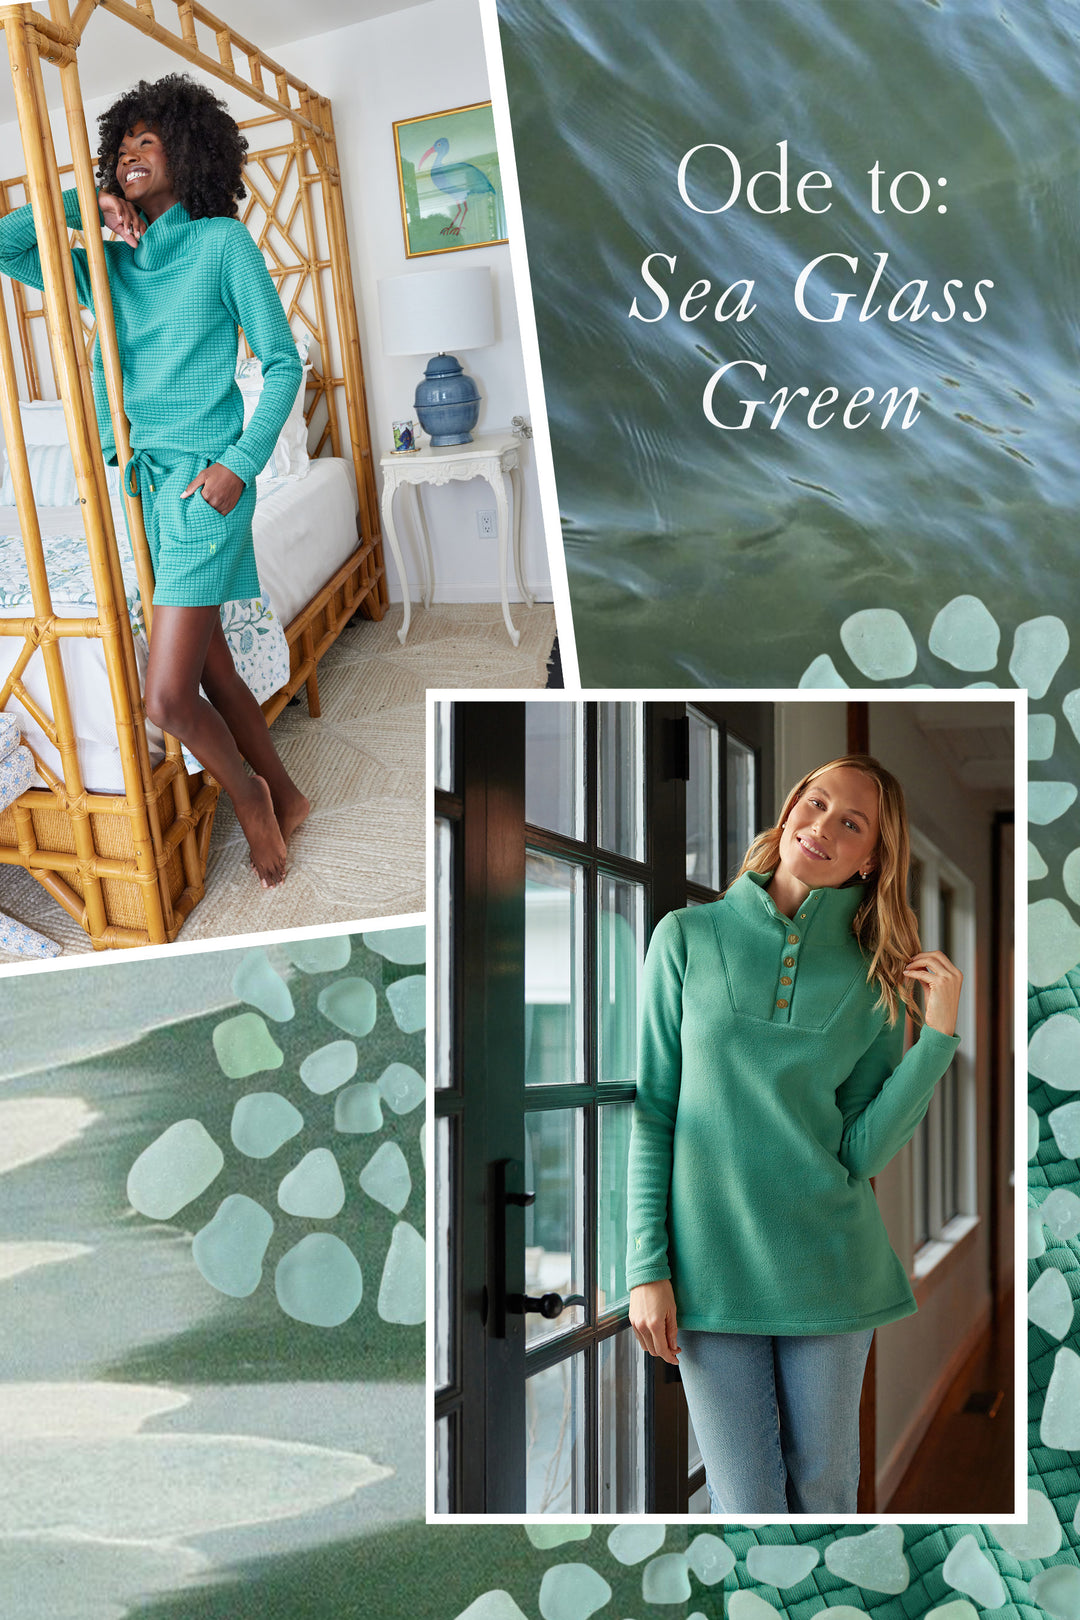 Ode to: Sea Glass Green